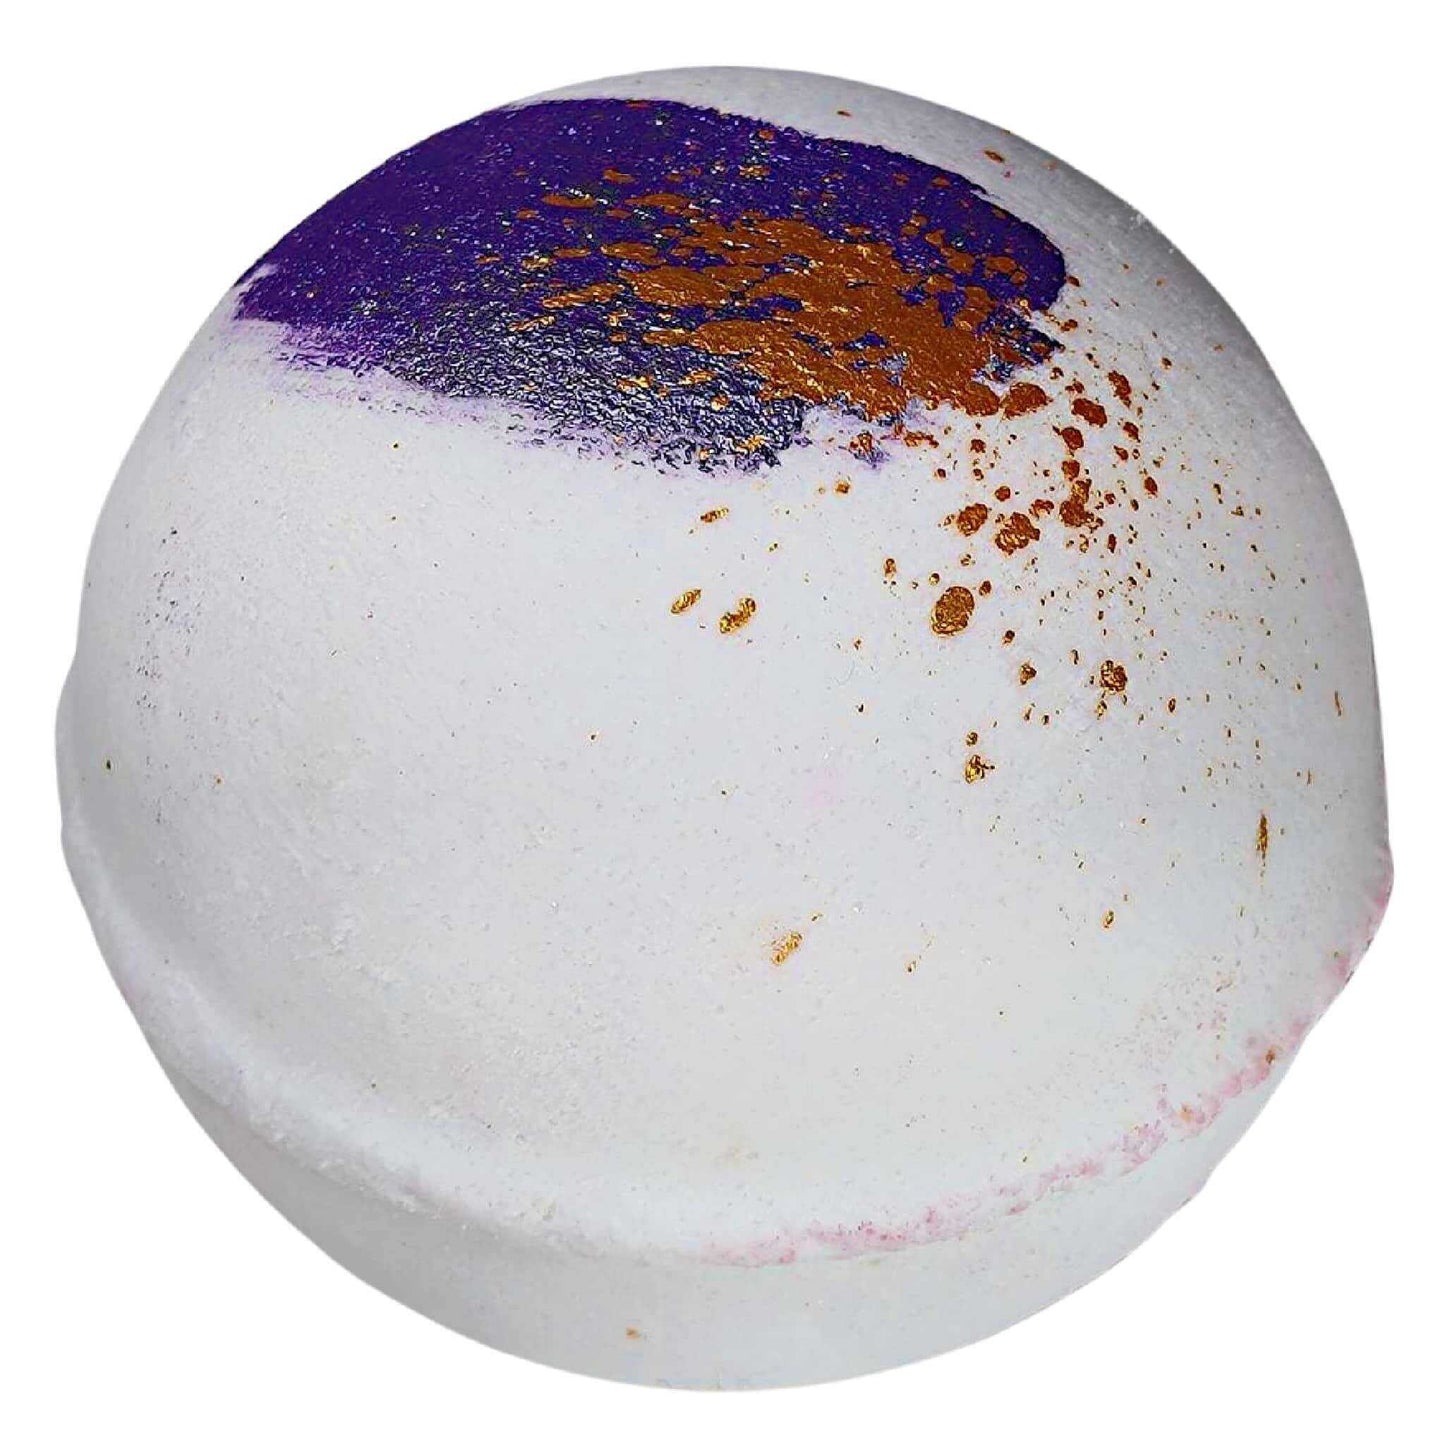 Turn your bathtime into a spa experience with Clear Skin Collagen 24k Gold Bath Bomb. Pamper your skin today!